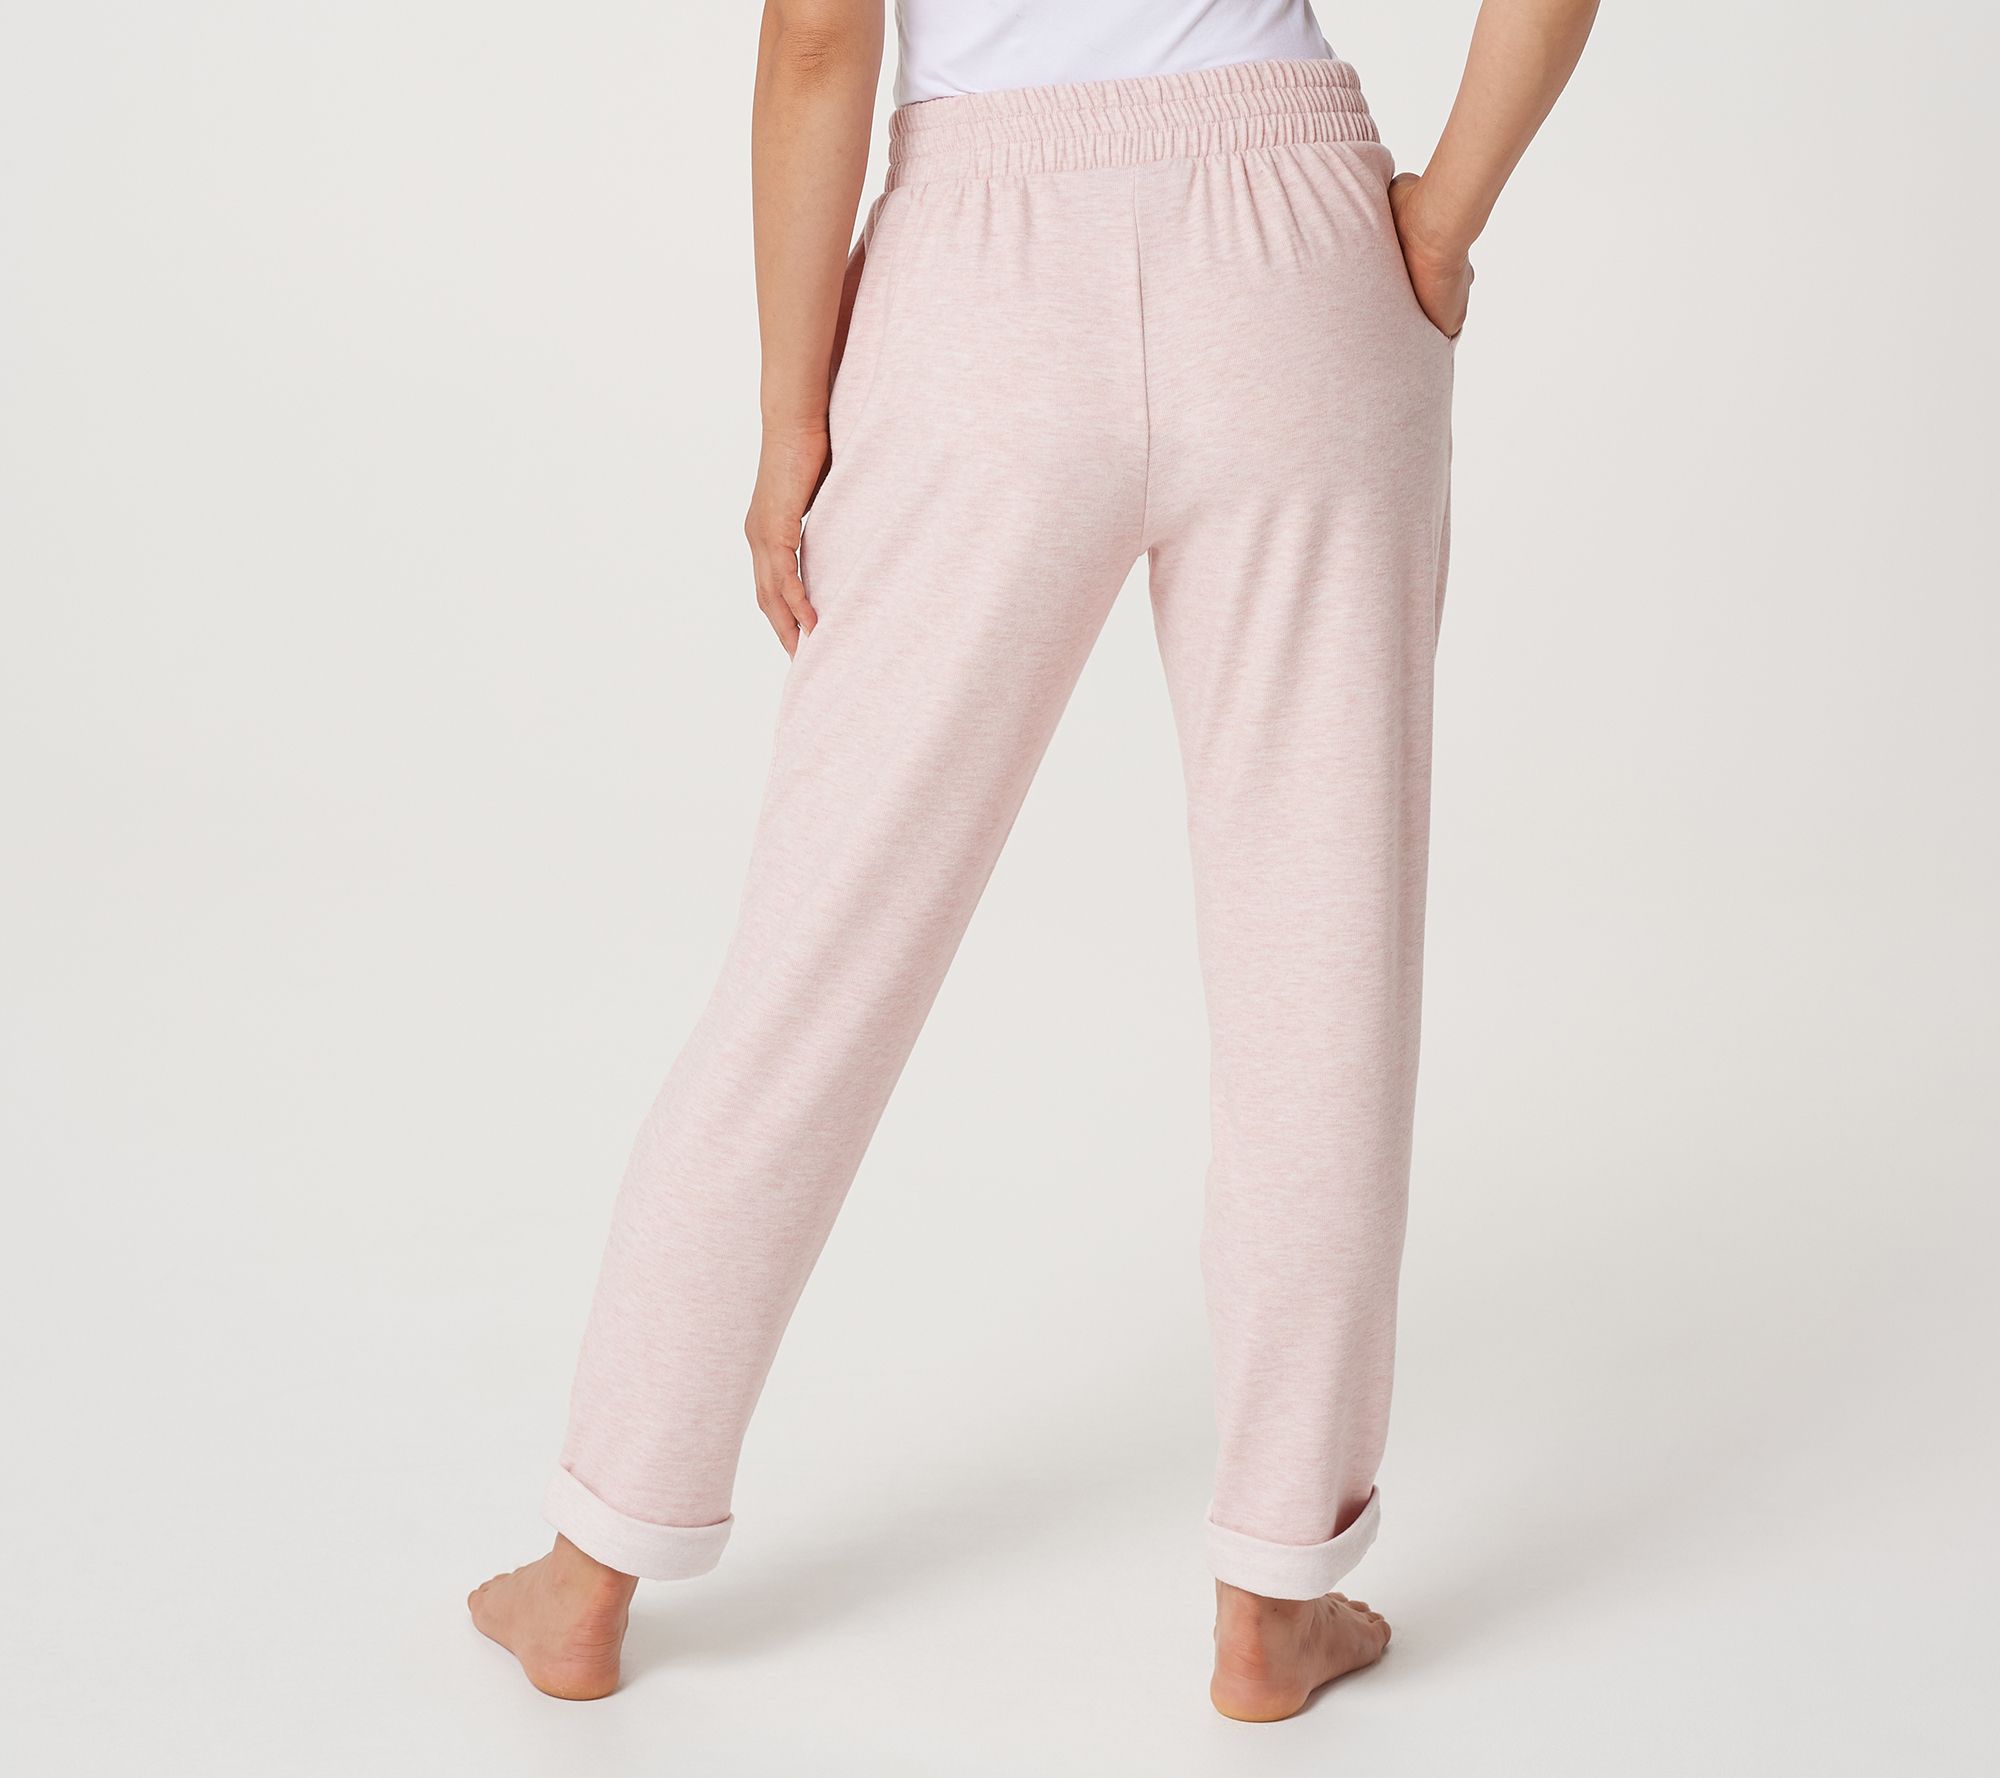 AnyBody Petite Double Knit Pant with Cuff Detail - QVC.com